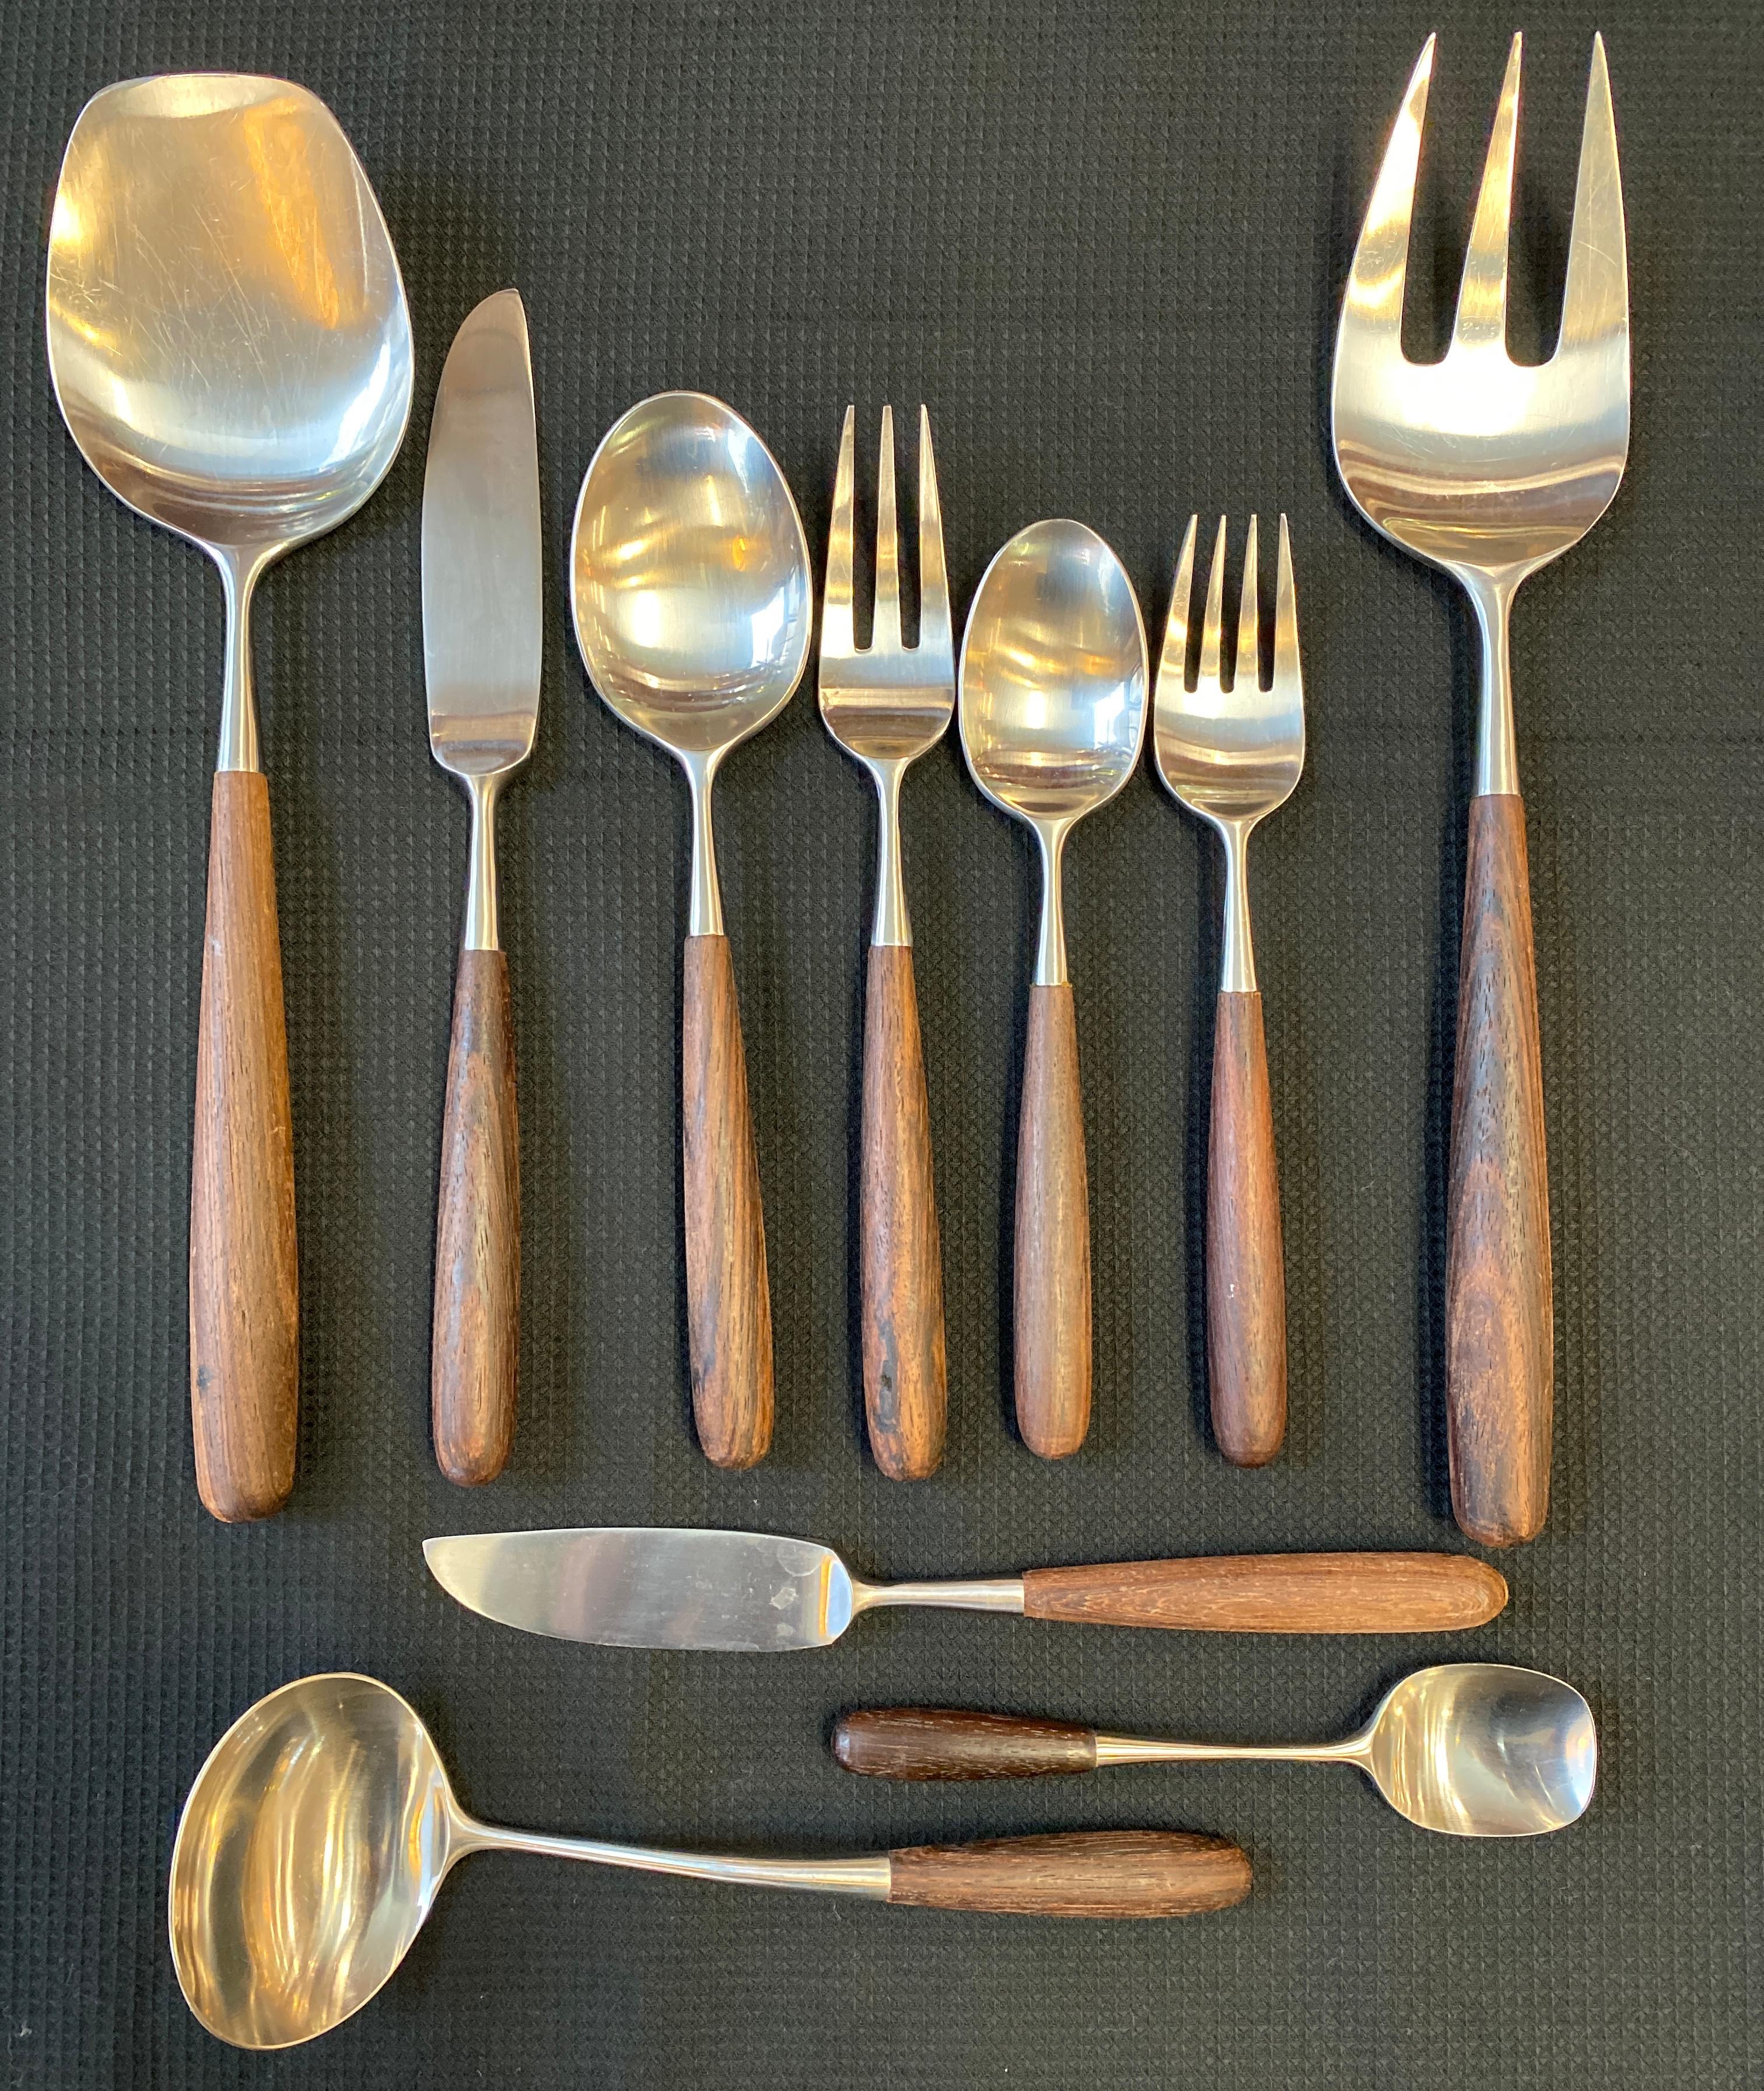 Offered here is a Lauffer 51 piece set of flatware made in Japan
Made of stainless steel with Palisander handles.
Stylish and sleek Scandinavian design, with superb craftsmanship 
Enough pieces for 8 place settings.

What is included in this